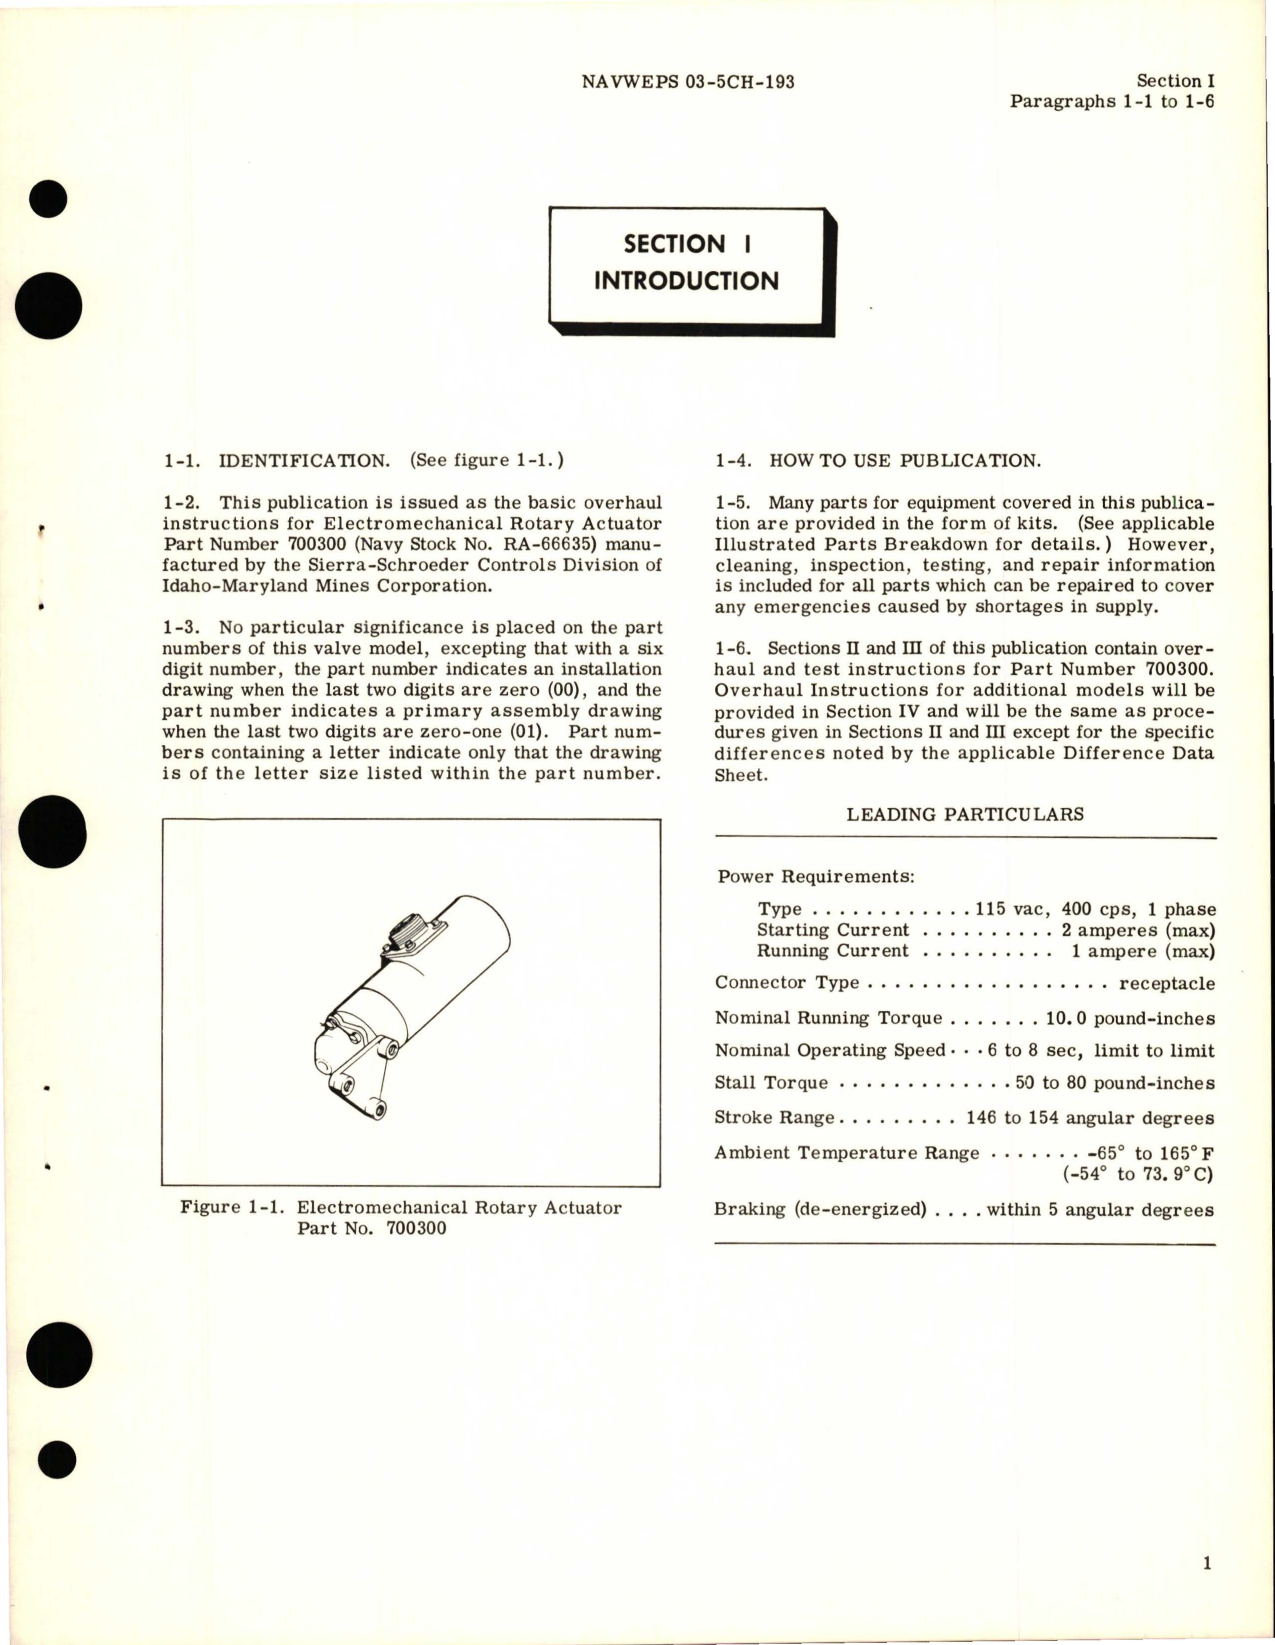 Sample page 5 from AirCorps Library document: Overhaul Instructions for Electromechanical Rotary Actuators - Parts 700300 and C10031